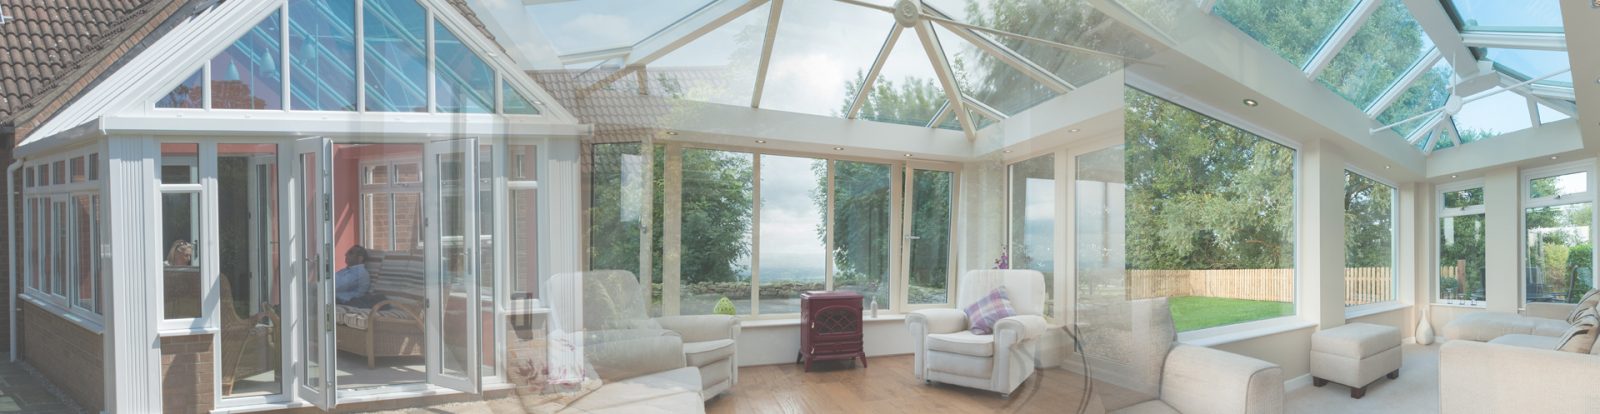 Conservatories and roofing